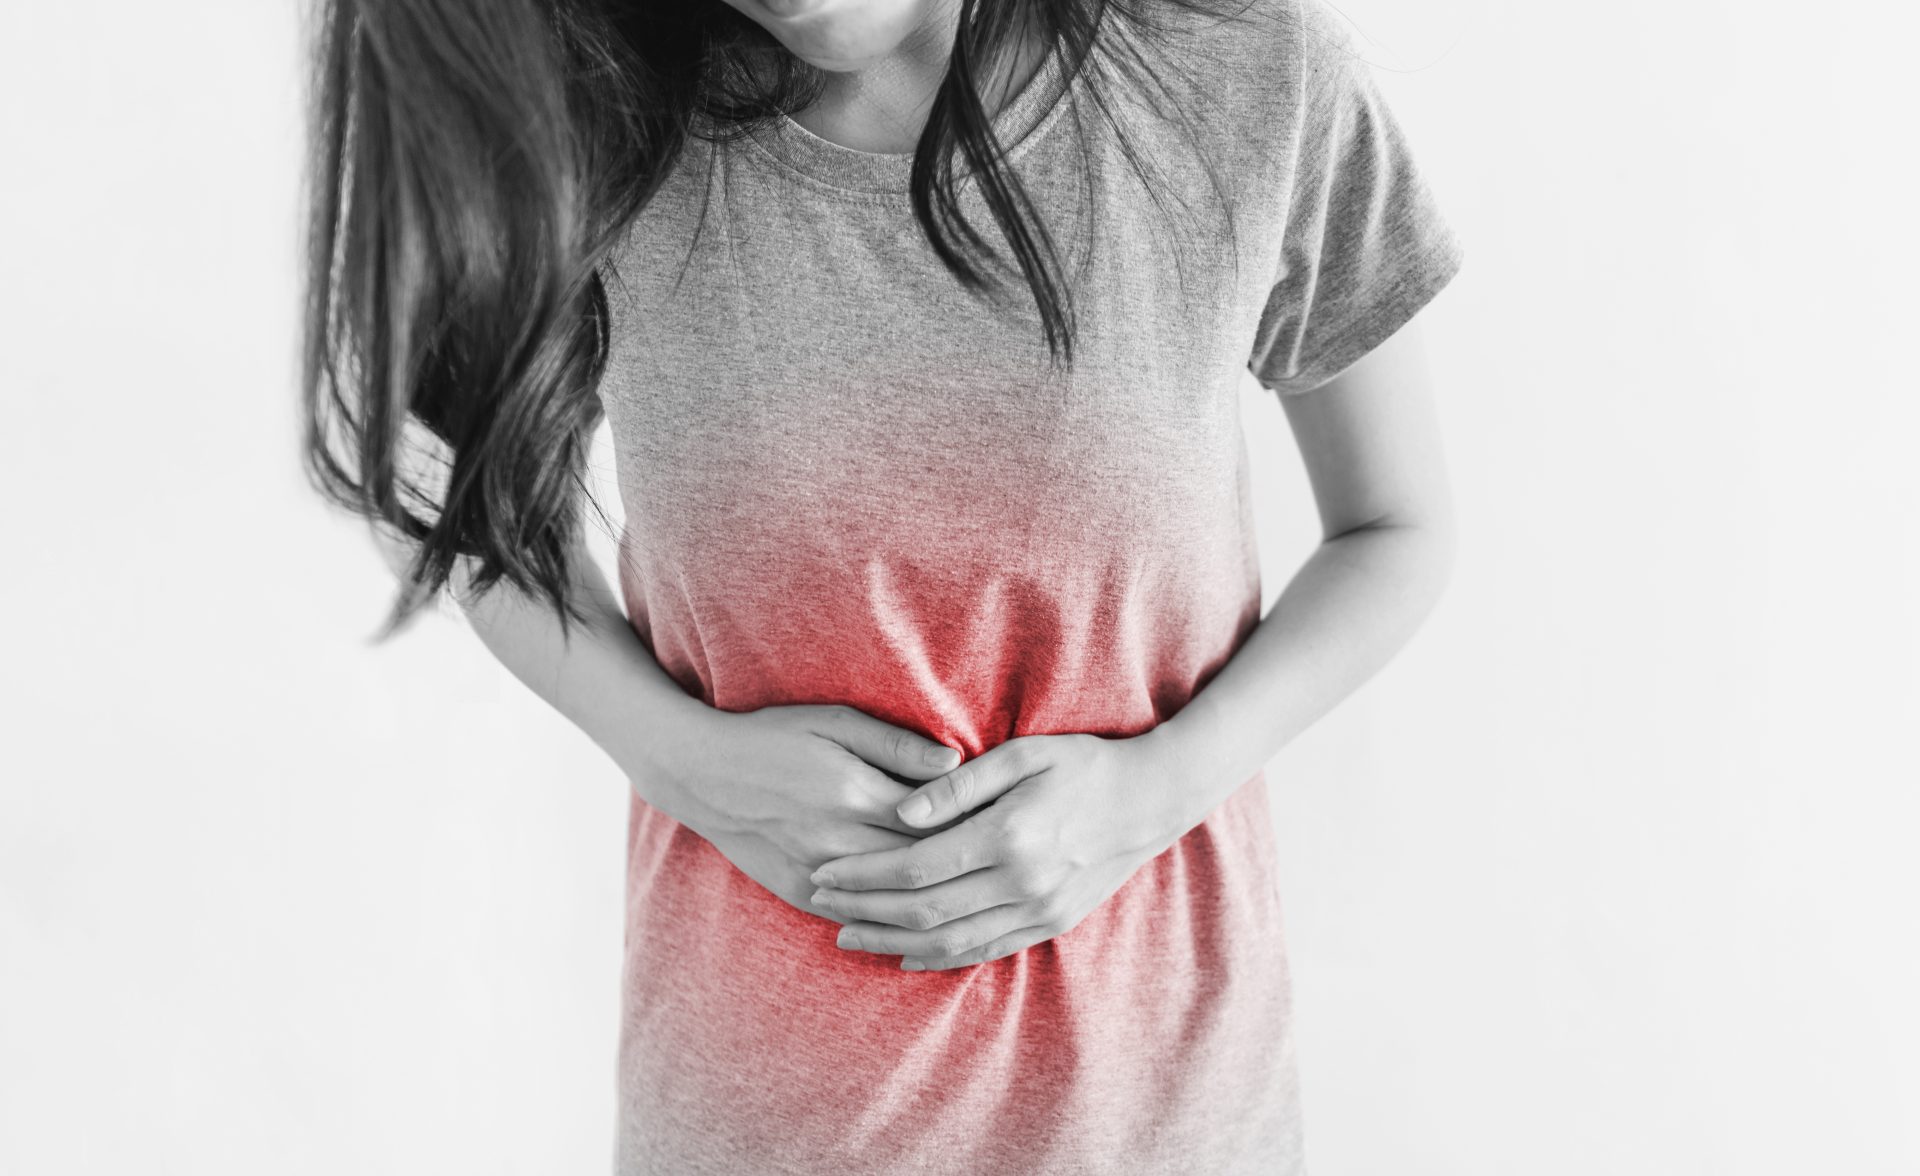 How to prevent uterine fibroids that you need to know